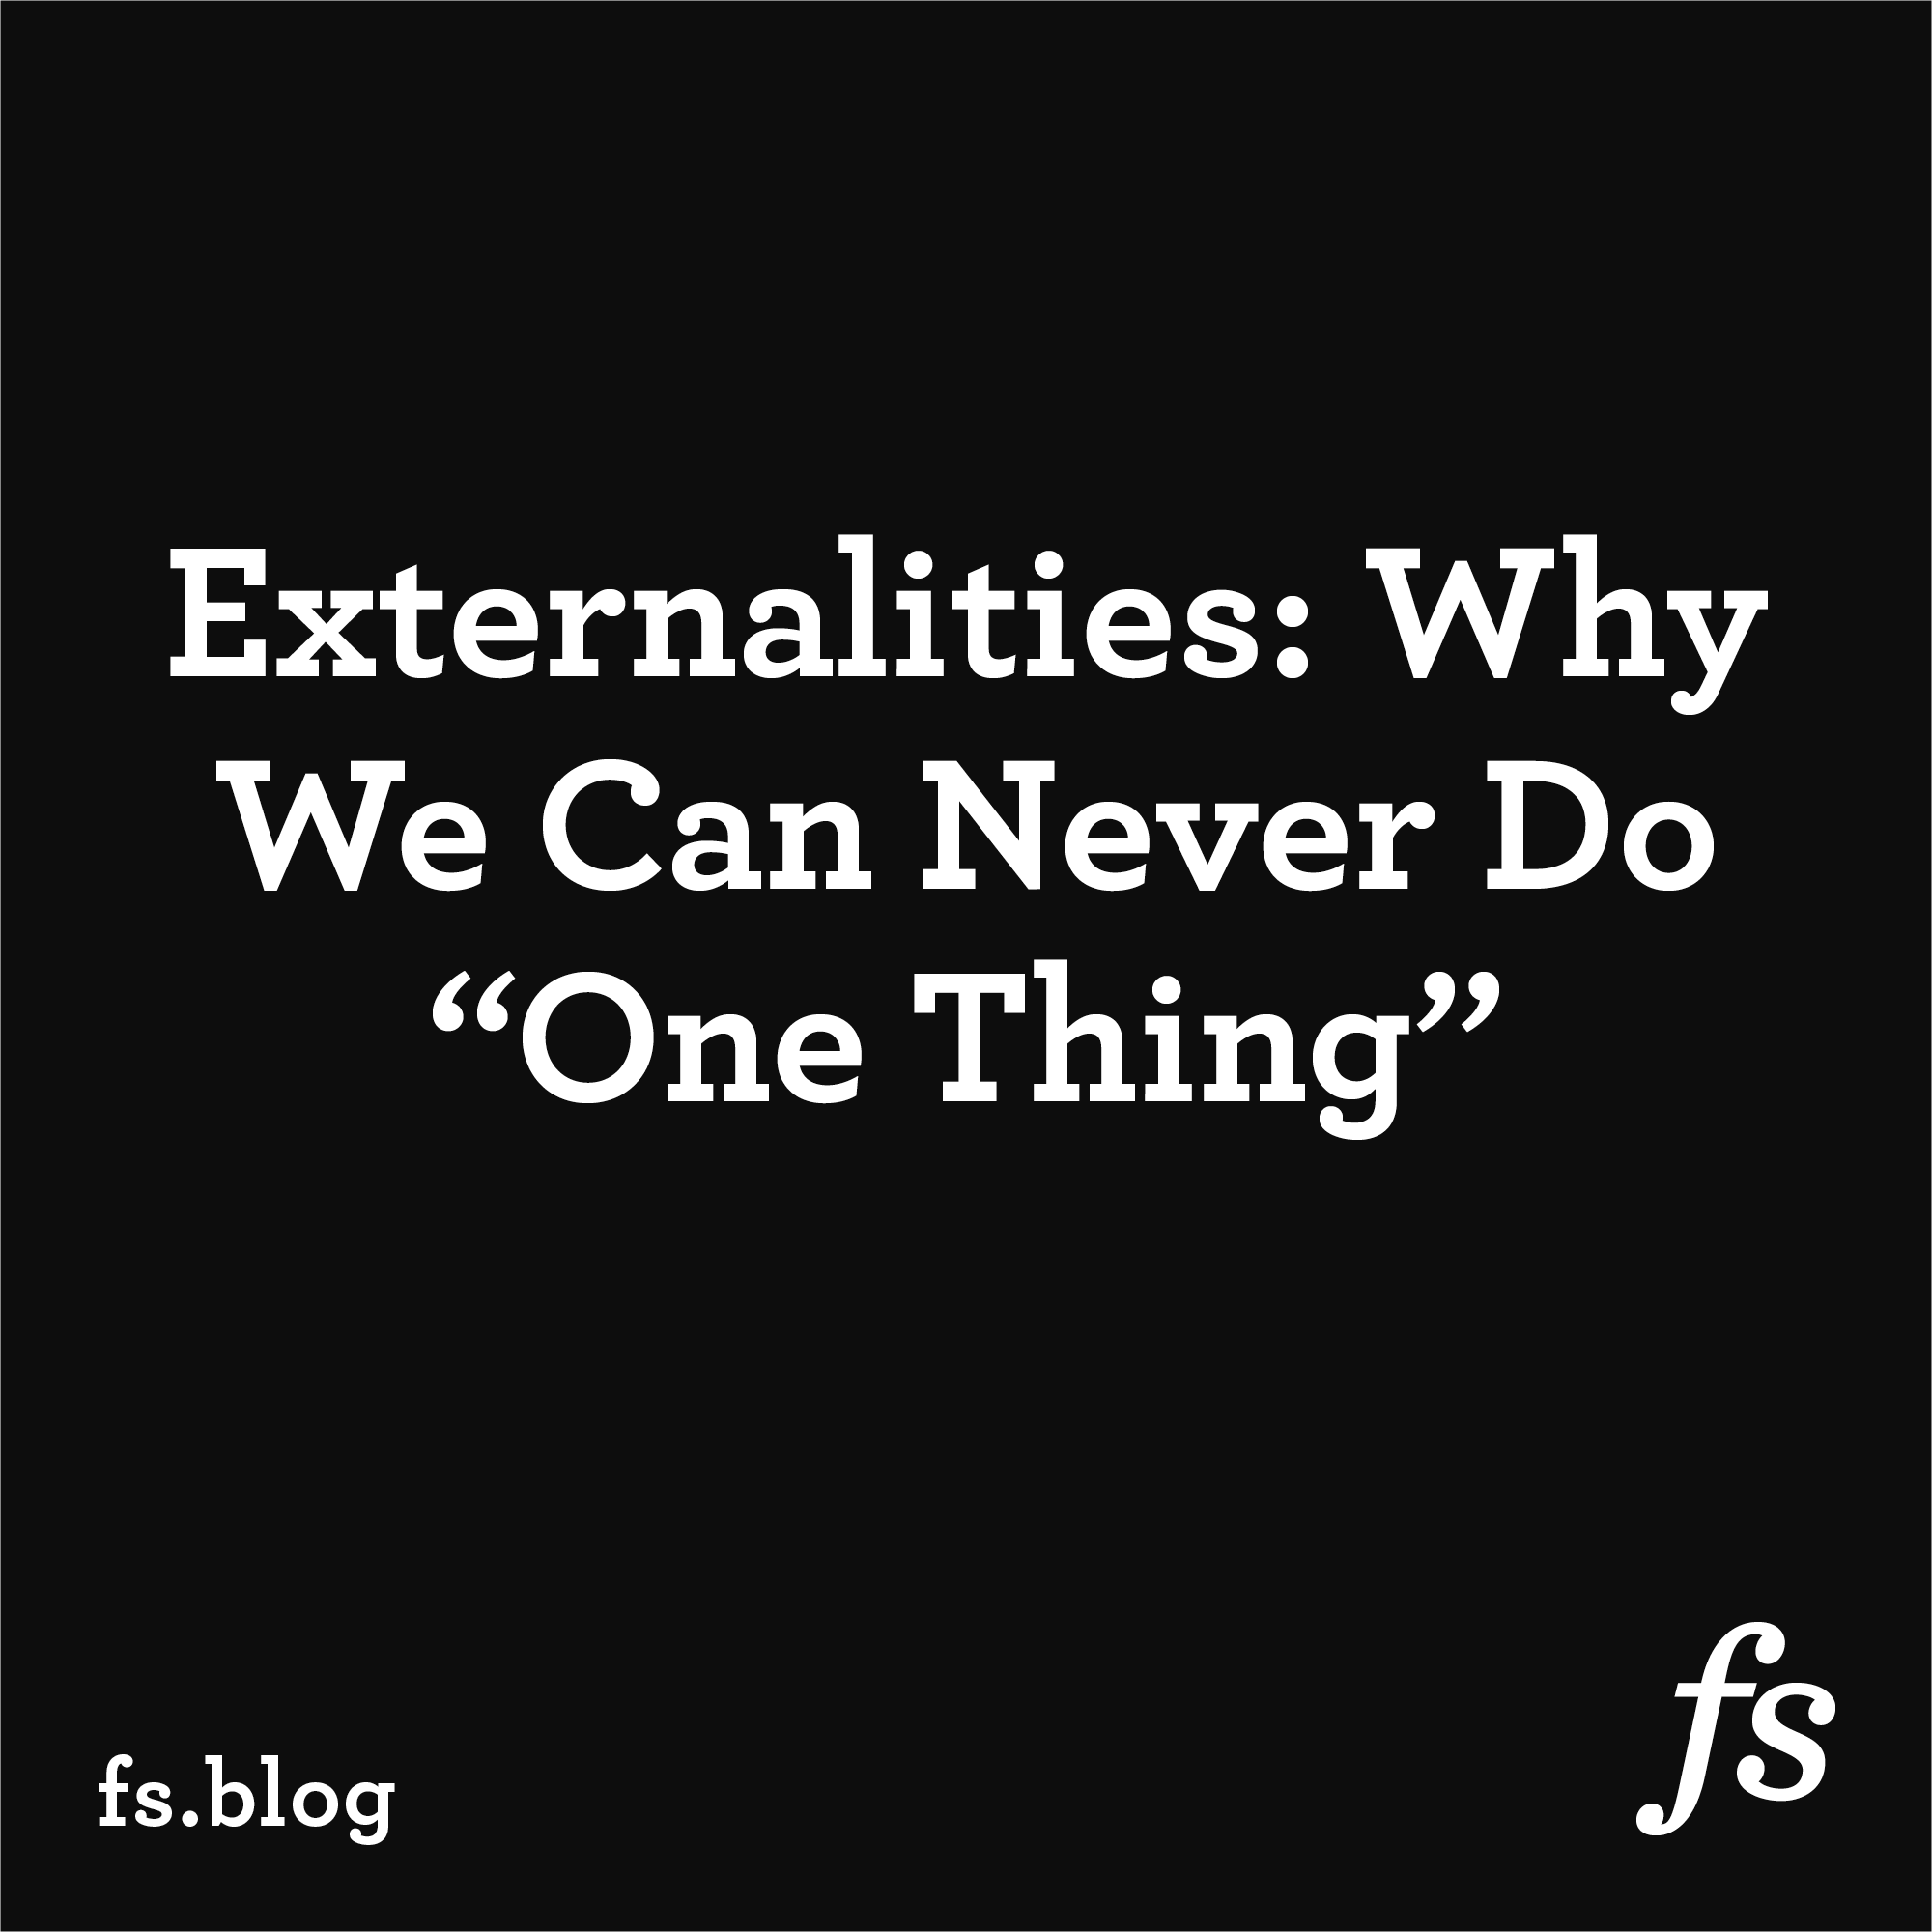 Externalities: Why We Can Never Do “One Thing”